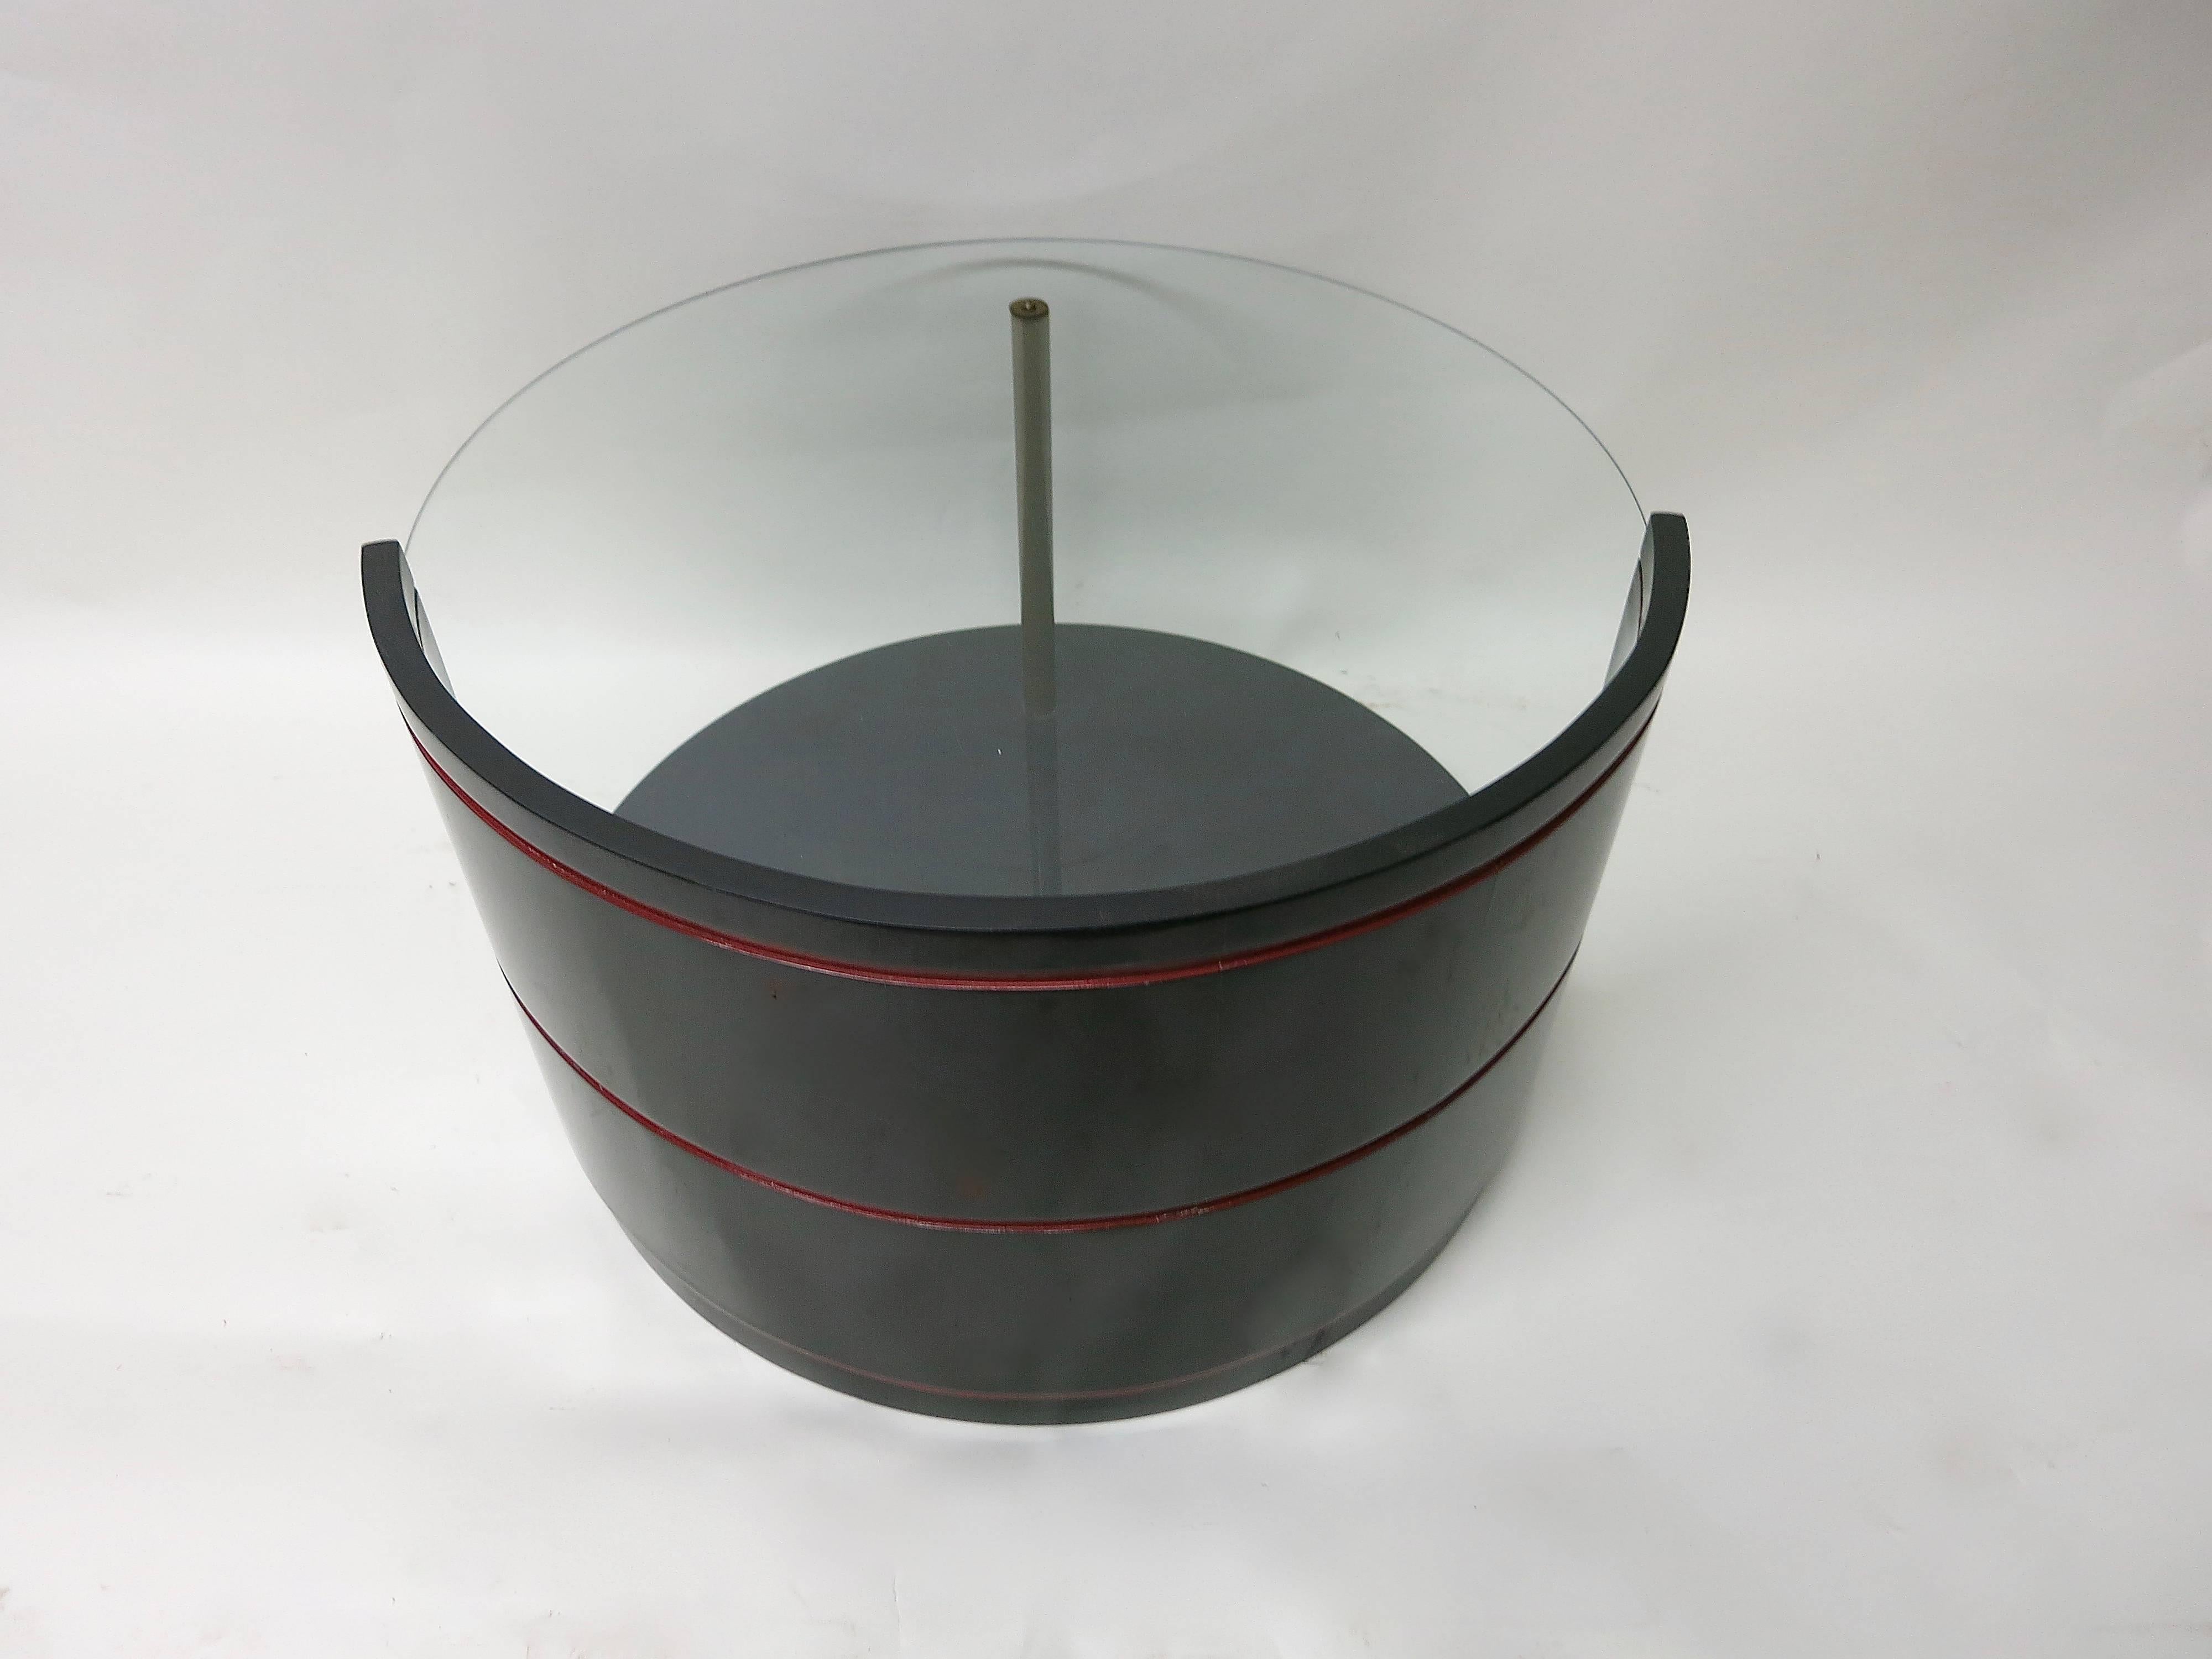 Restored cocktail or side table in black and red lacquer over wood with a round glass top and a patinated brass tube. 